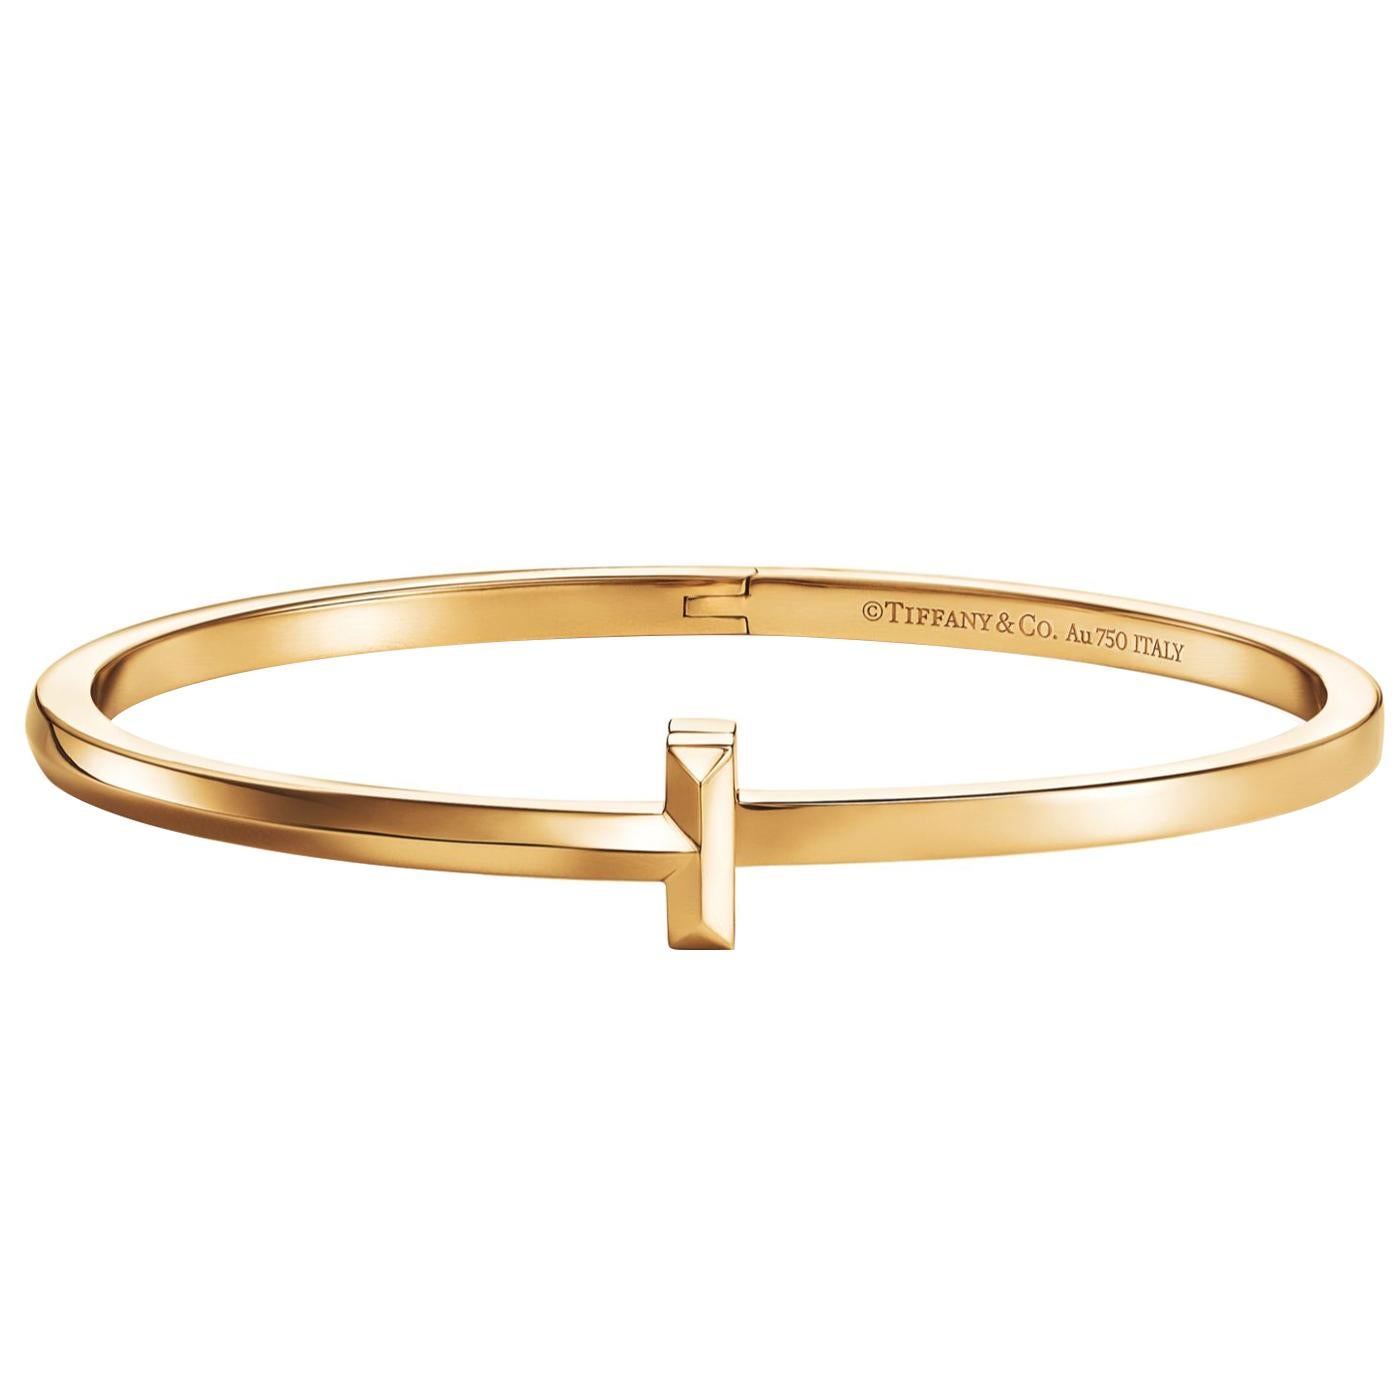 Wrapped around the wearer in a continuous, unbroken circle, this hinged bangle was expertly designed with a strong, beveled 